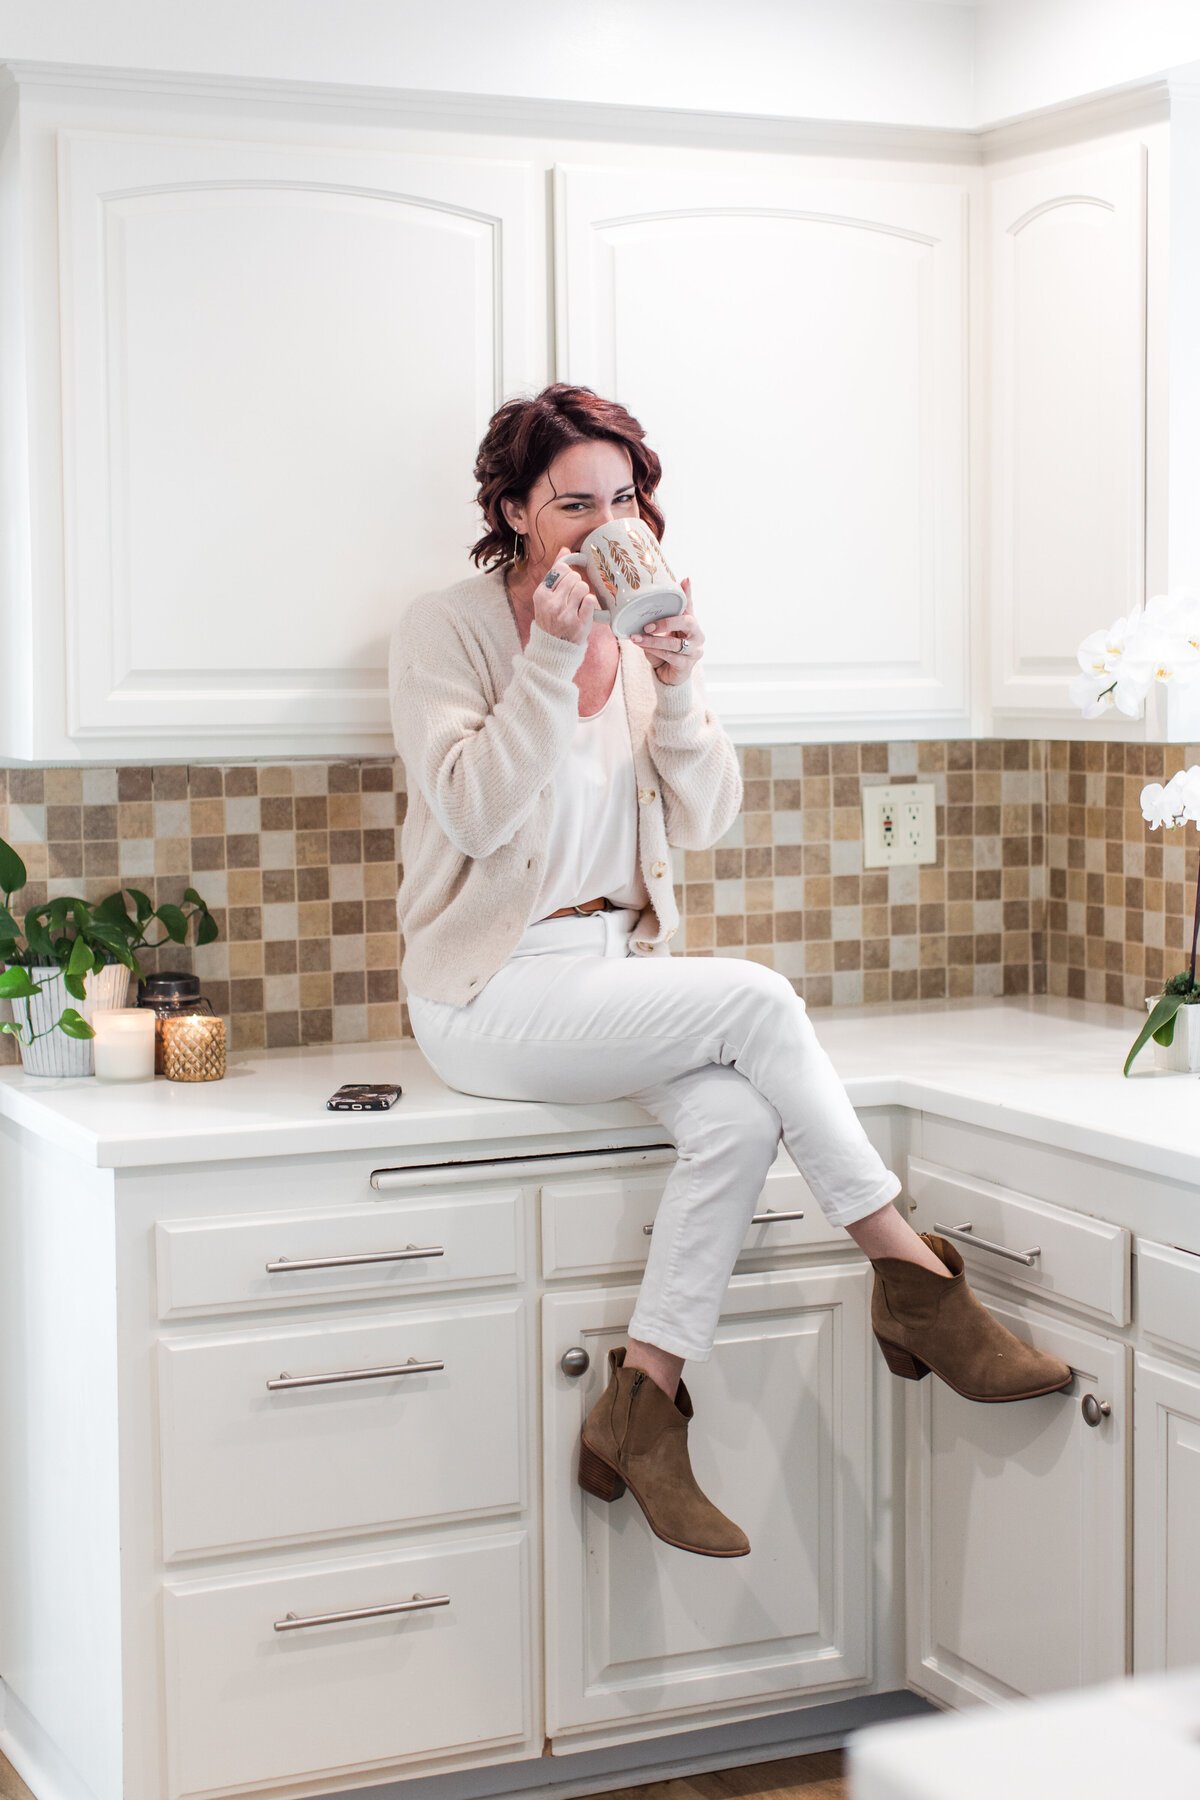 realtor-personal-branding-photography-sitting-on-counter